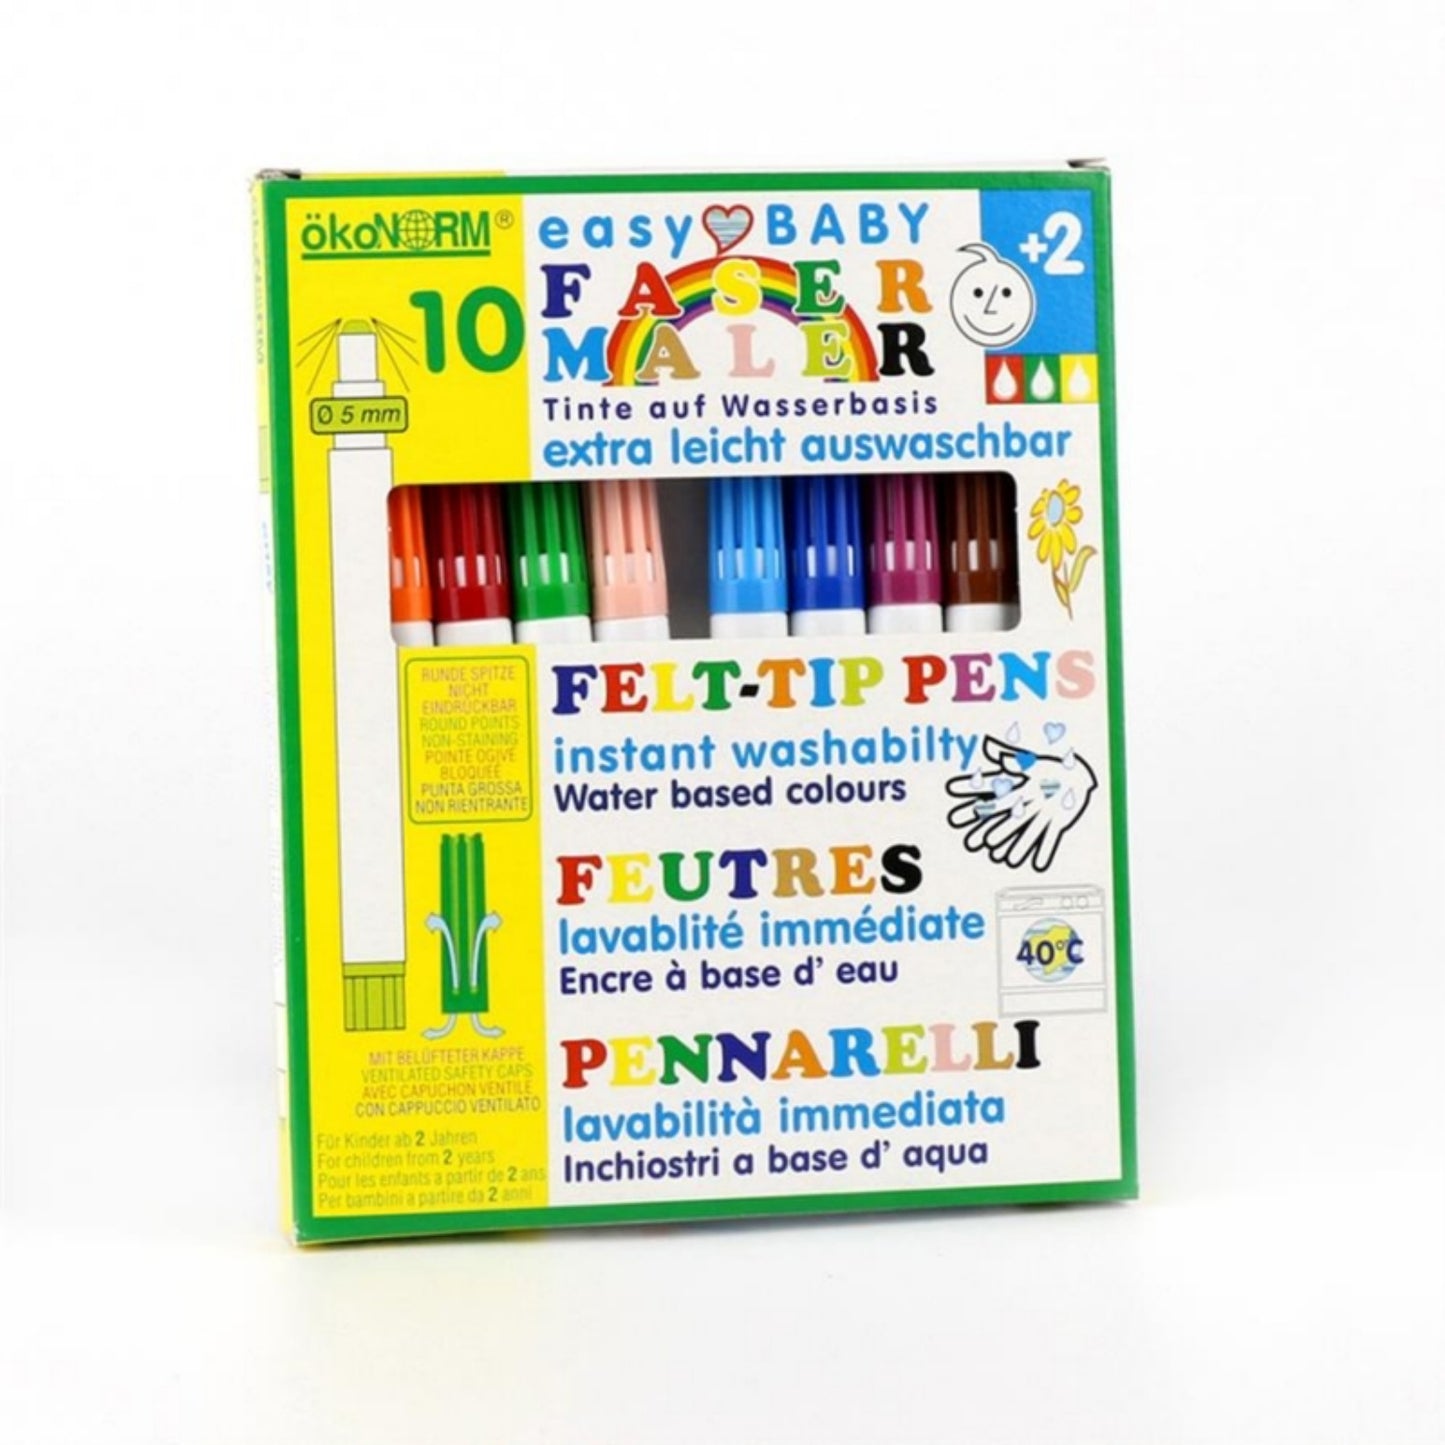 okoNORM Easy Baby Felt-Tip Pens | Vegan, Water-Based Inks & Eco-Friendly | 10 Colours | Box Closeup | BeoVERDE.ie